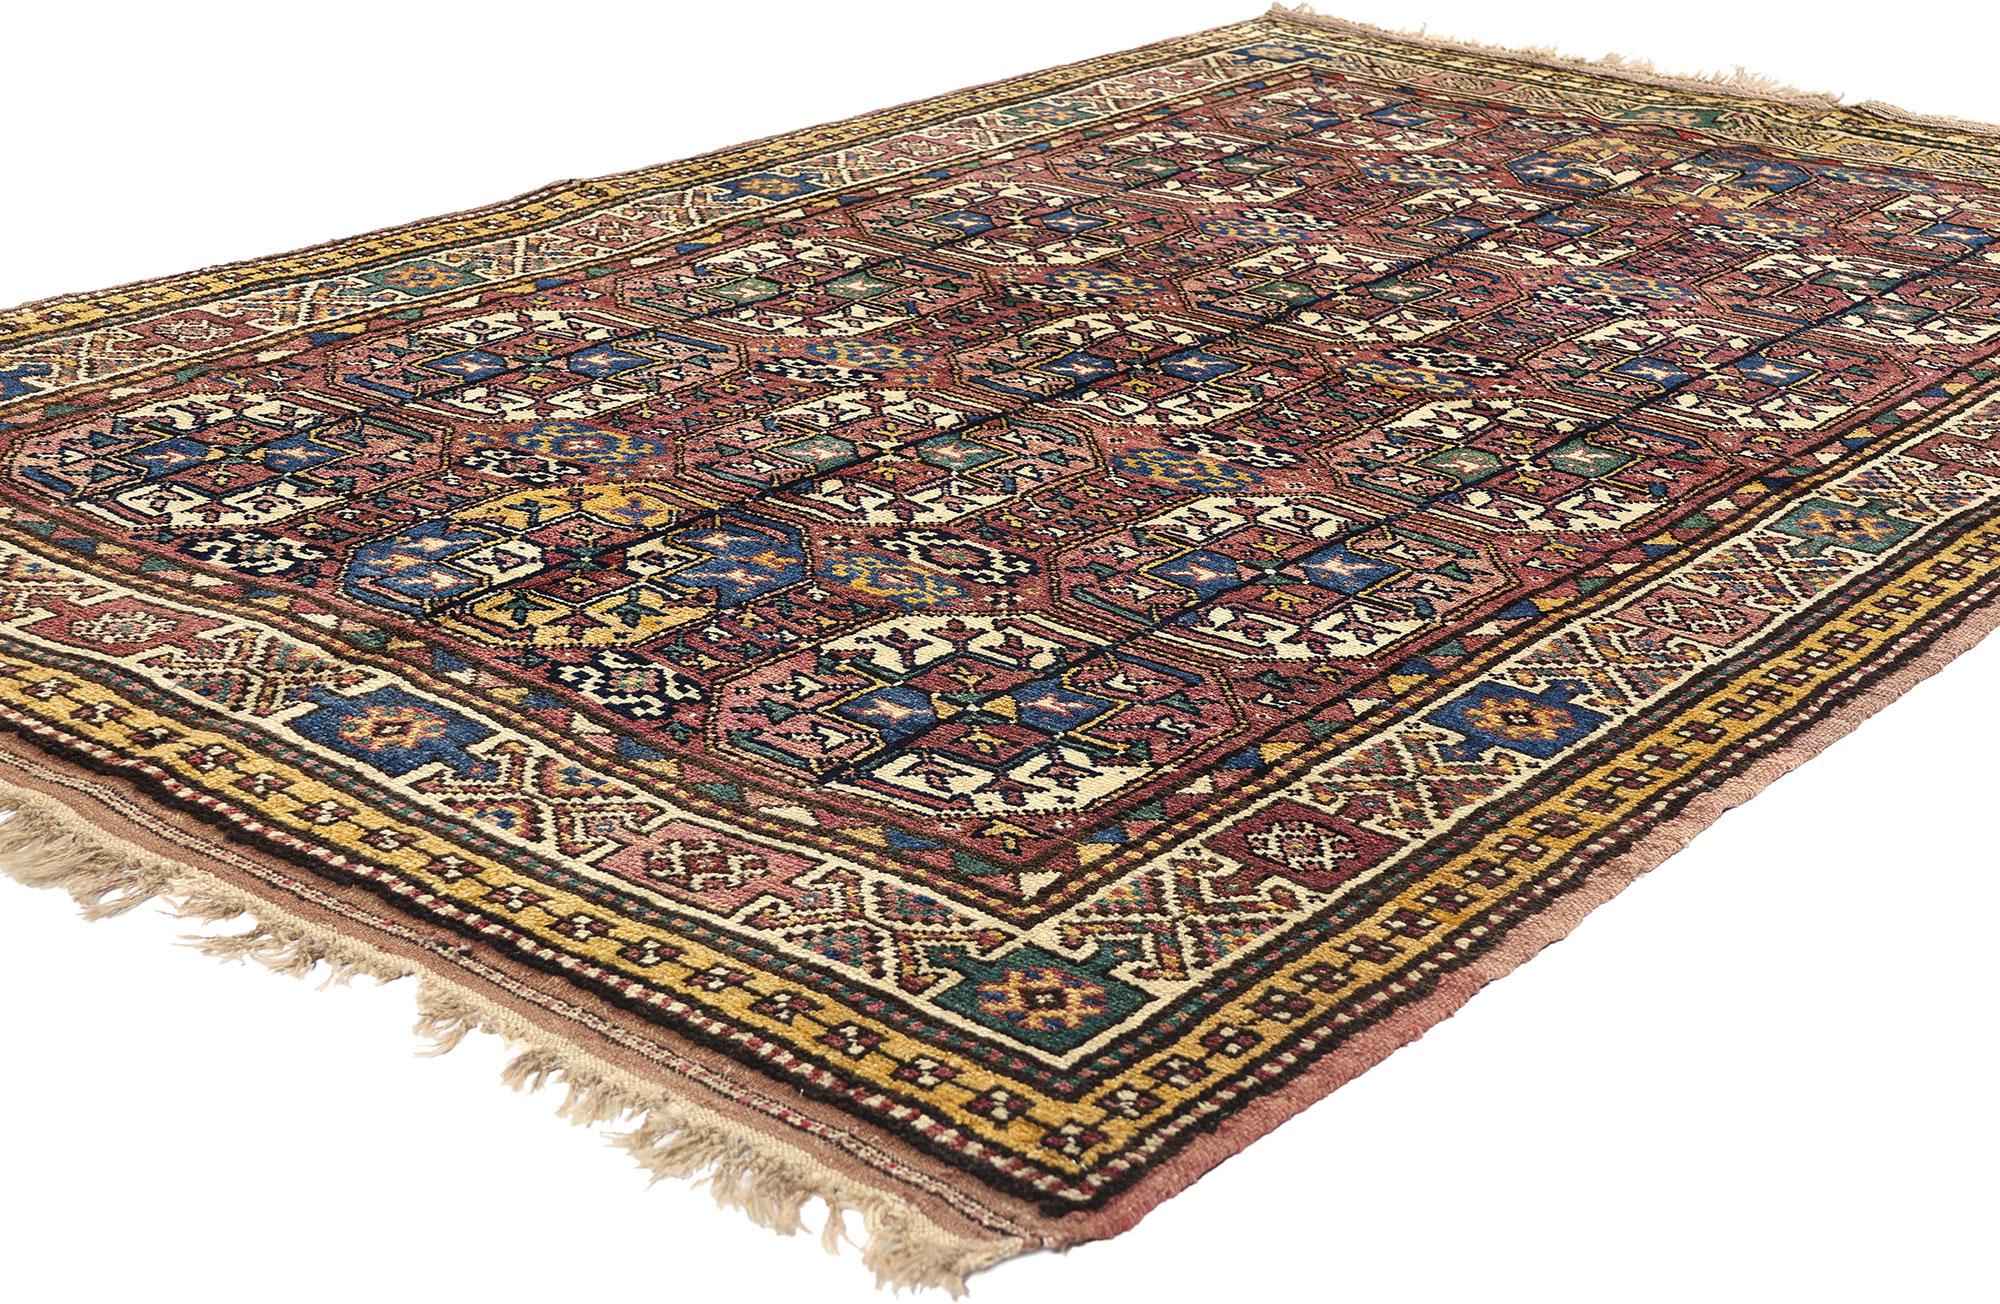 60892 Antique Plum Caucasian Tekke Azerbaijan Rug, 05'01 x 08'01. Caucasian Azerbaijan rugs with Tekke elephant foot designs are distinguished by their intricate patterns and rich cultural heritage. These hand-knotted rugs from the Caucasus region,